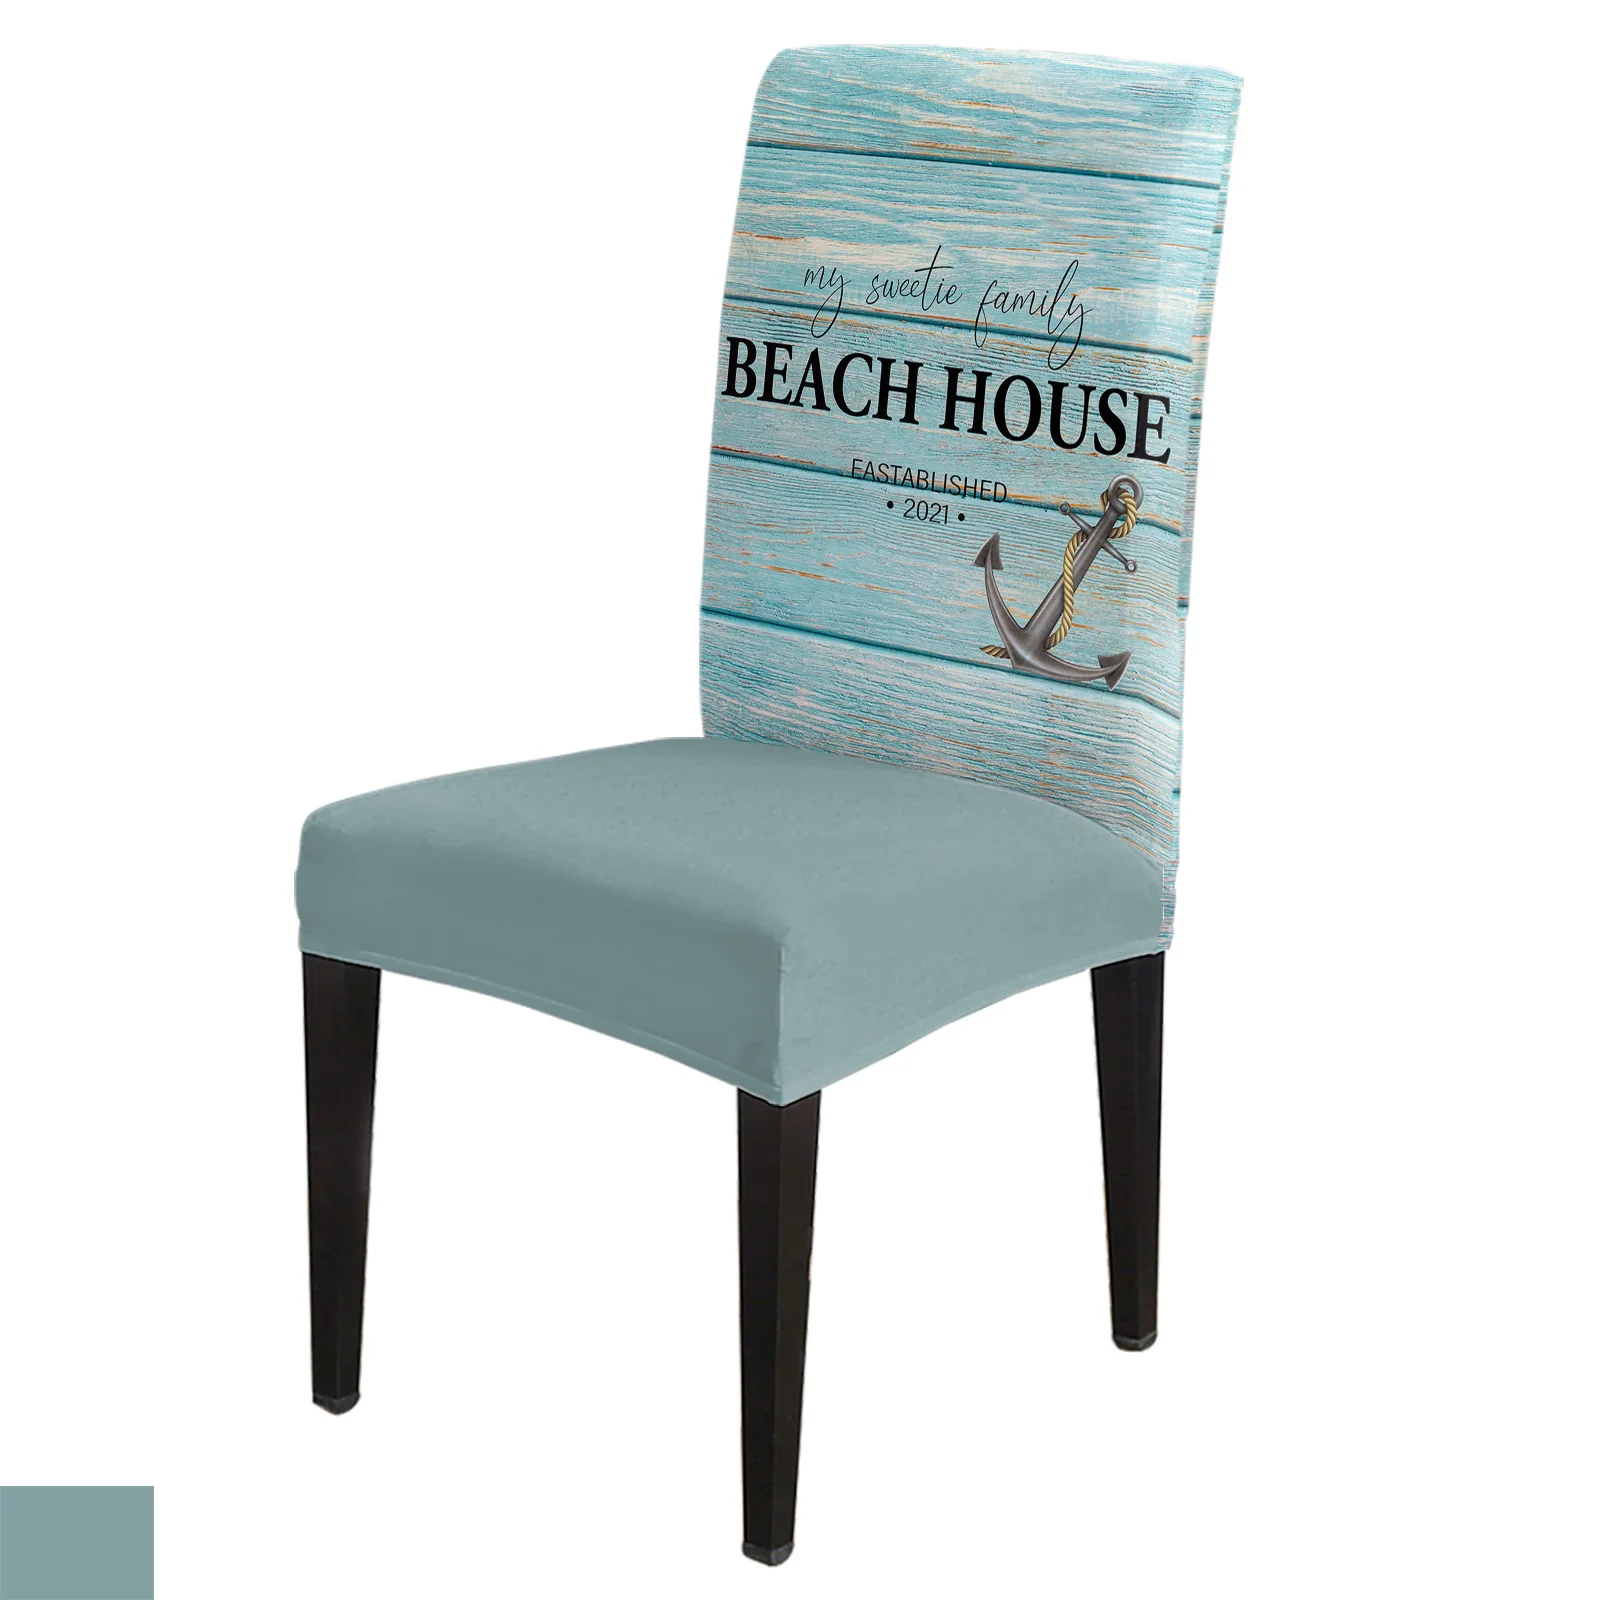 

Wood Grain Anchor Beach House Dining Chair Covers Spandex Stretch Seat Cover for Wedding Kitchen Banquet Party Seat Case